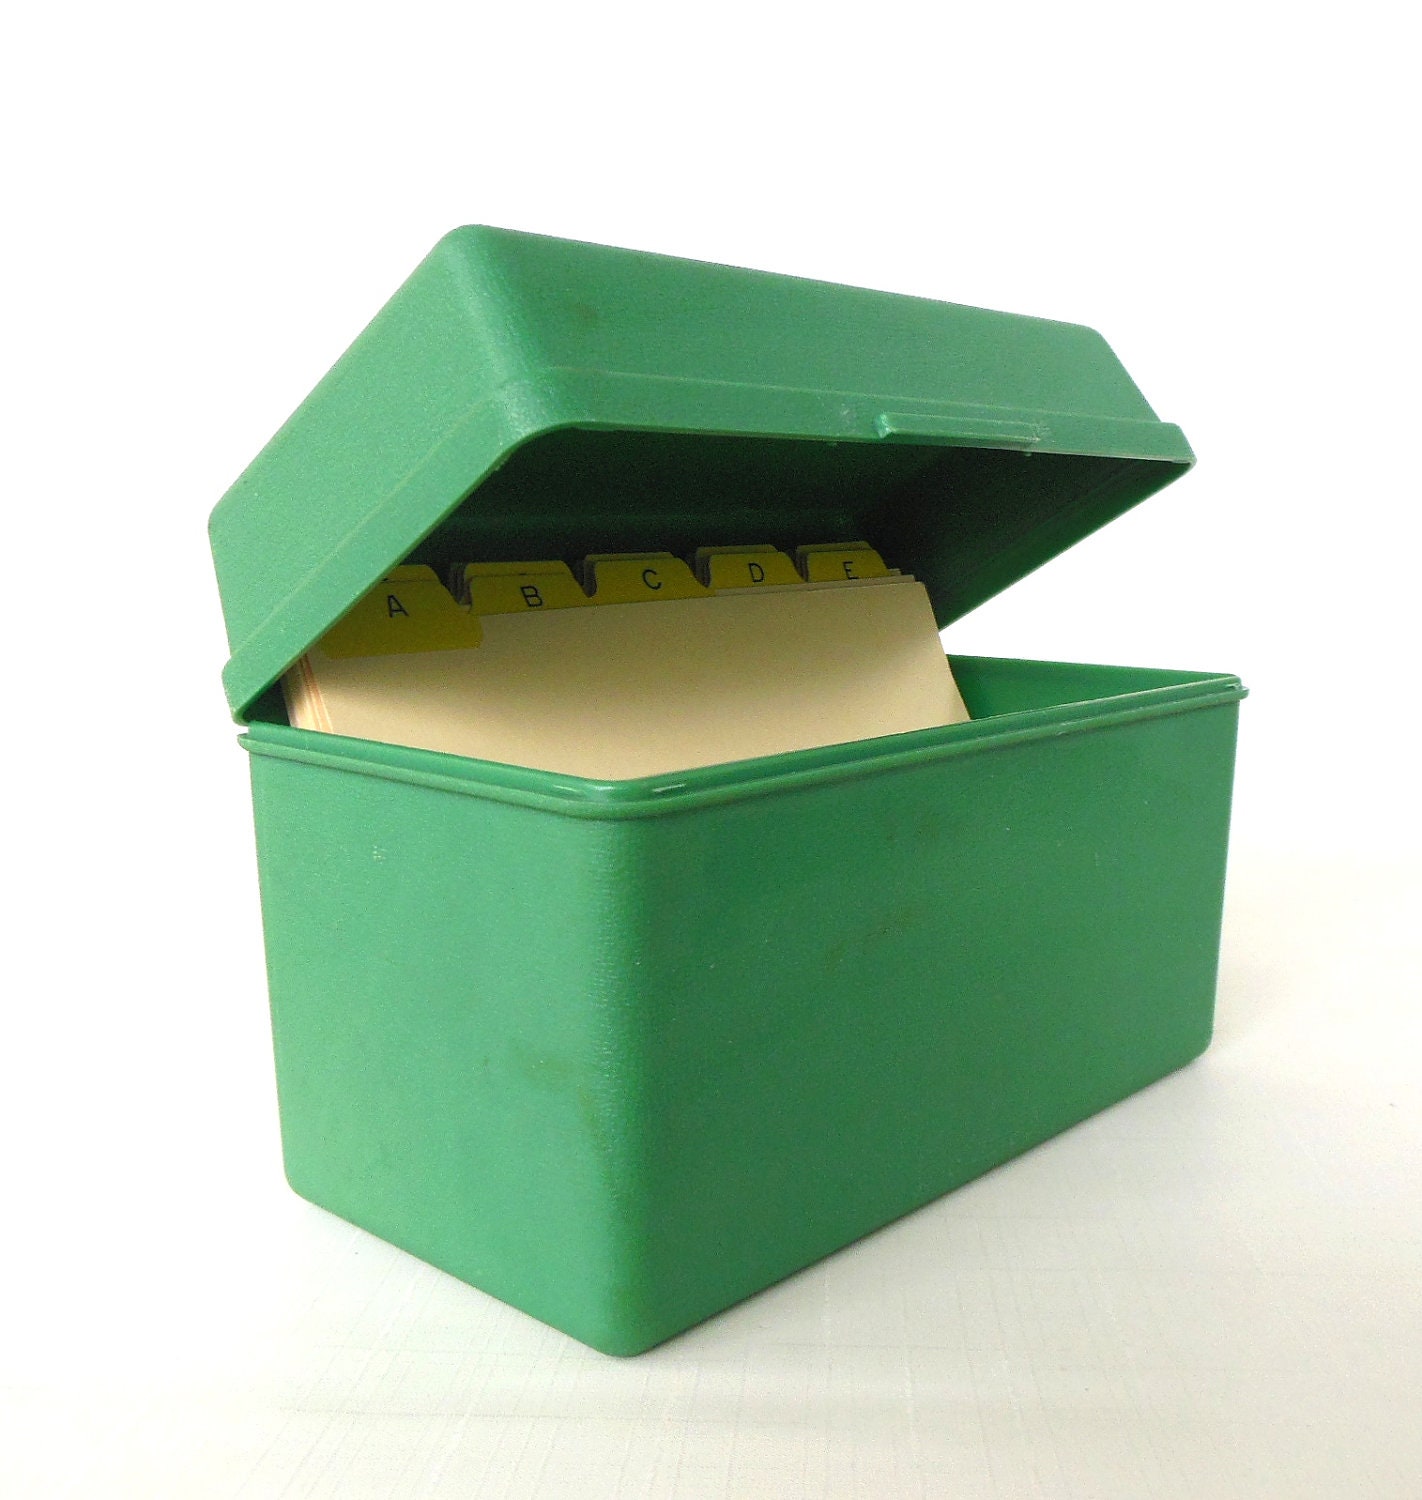 Index Card Box With Dividers